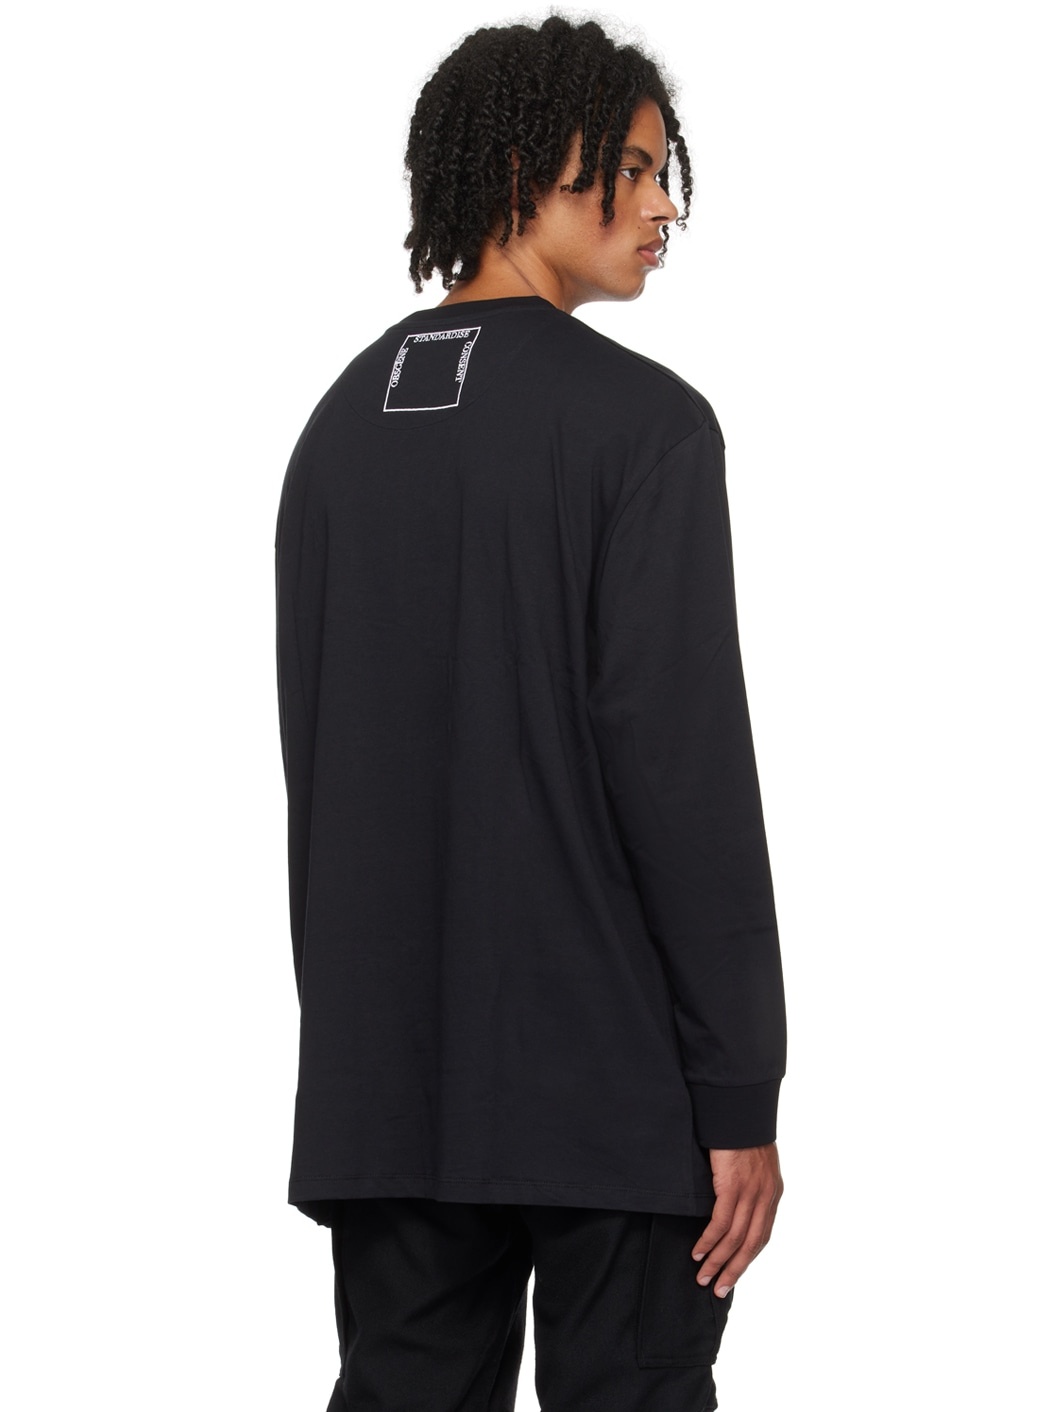 Black Fred Perry Edition Long Sleeve T-Shirt - 3